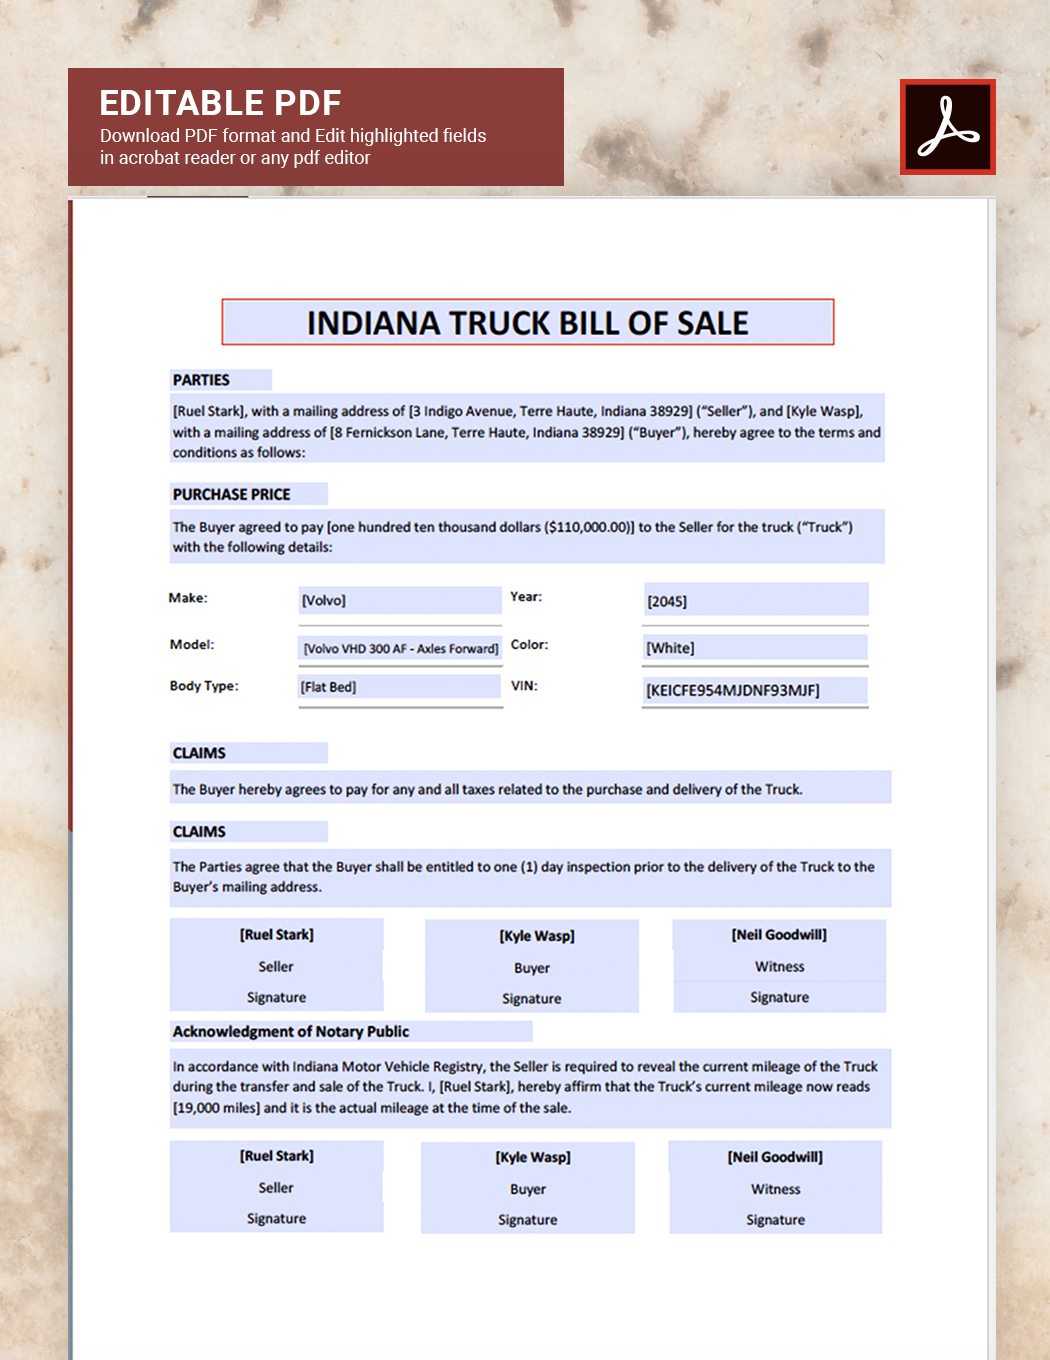 Indiana Truck Bill of Sale Template